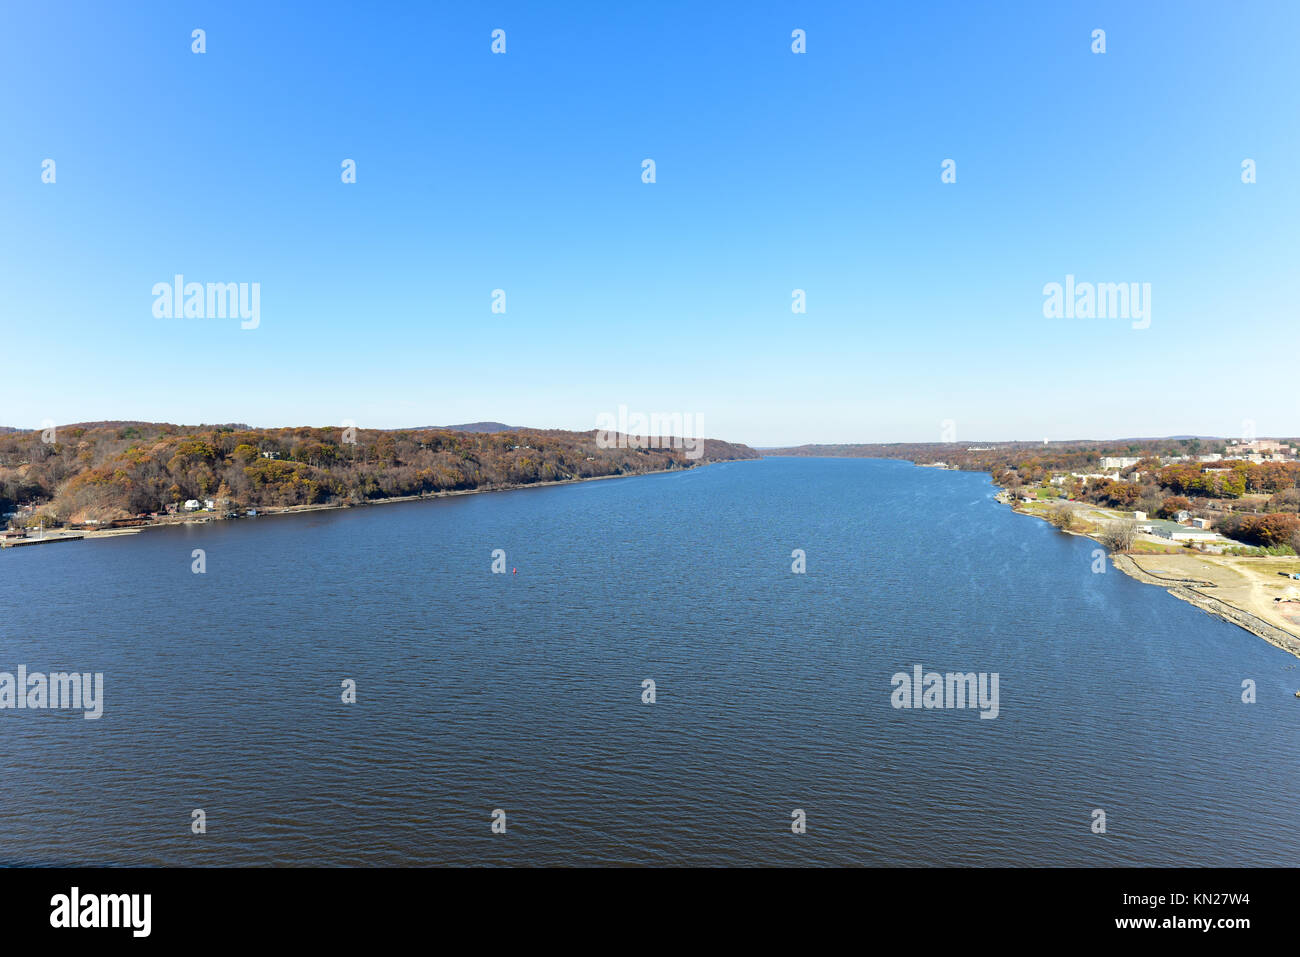 View from the Mid-Hudson Bridge crossing the Hudson River in Poughkeepsie, New York Stock Photo